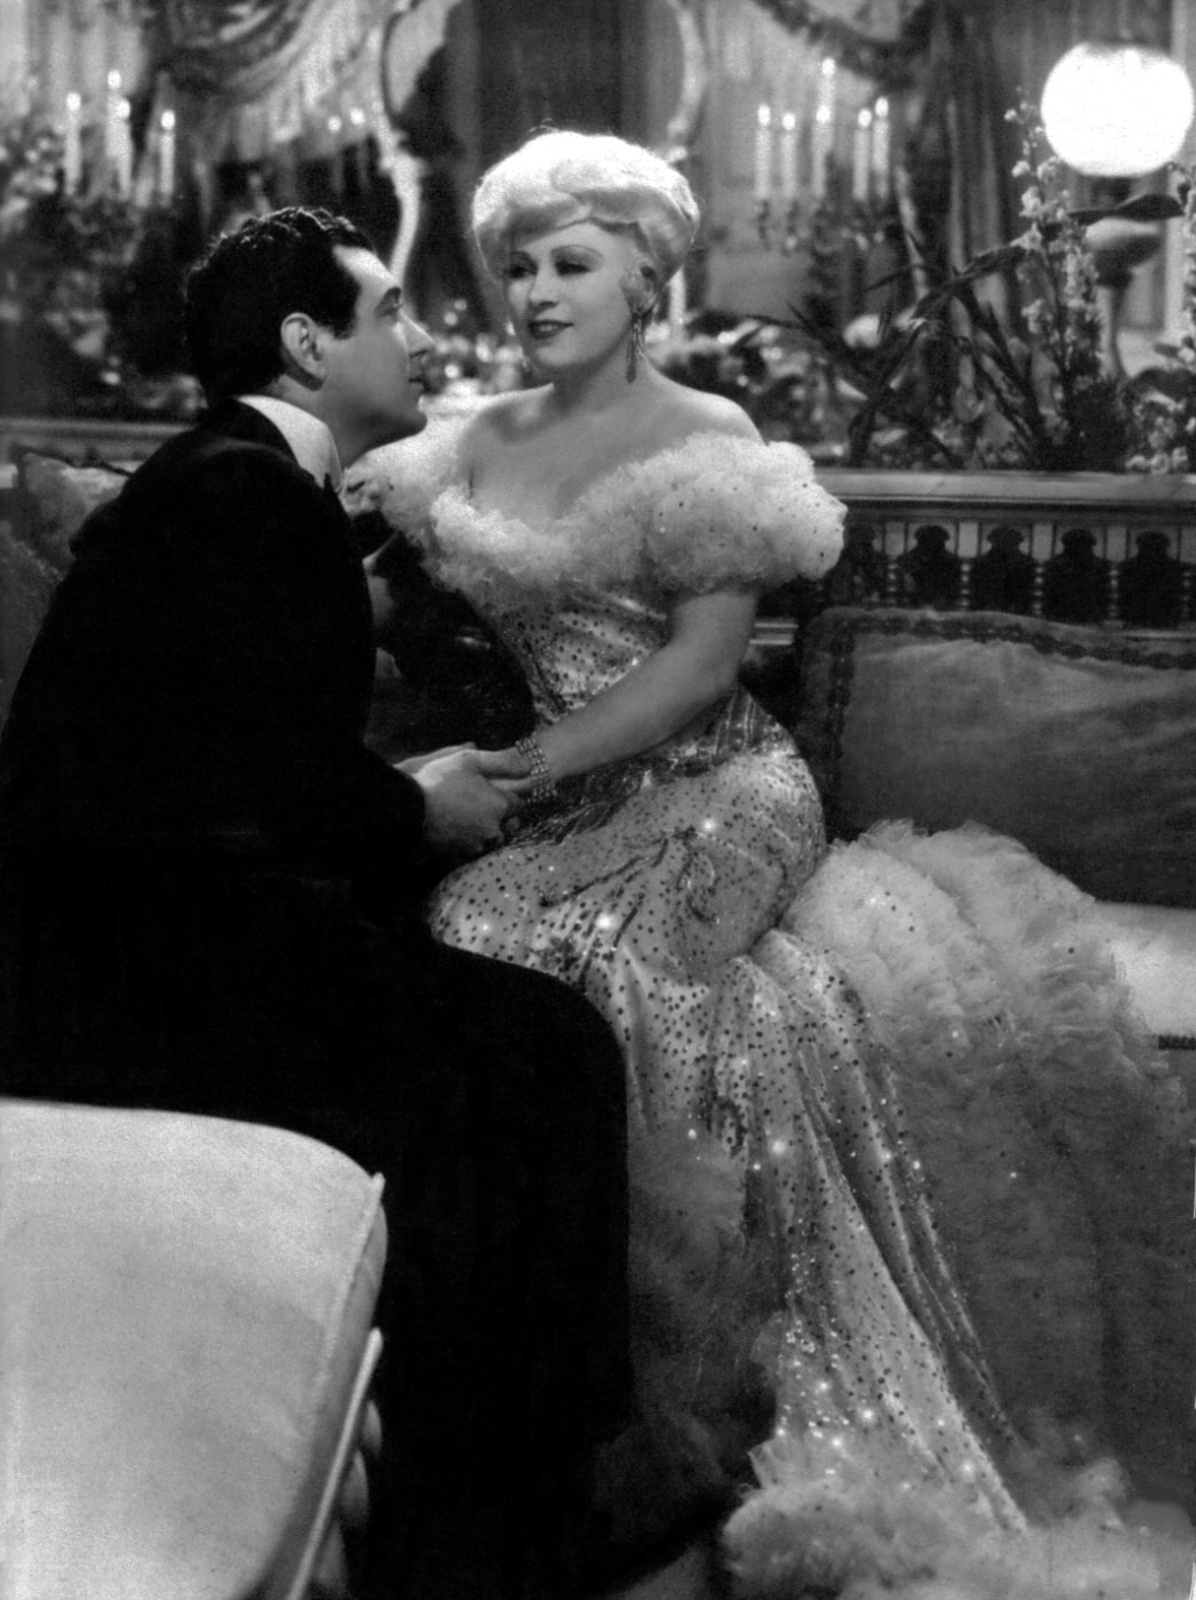 Actress Mae West in "Belle of the Nineties" 4 Celebrity Photo Print 1934 